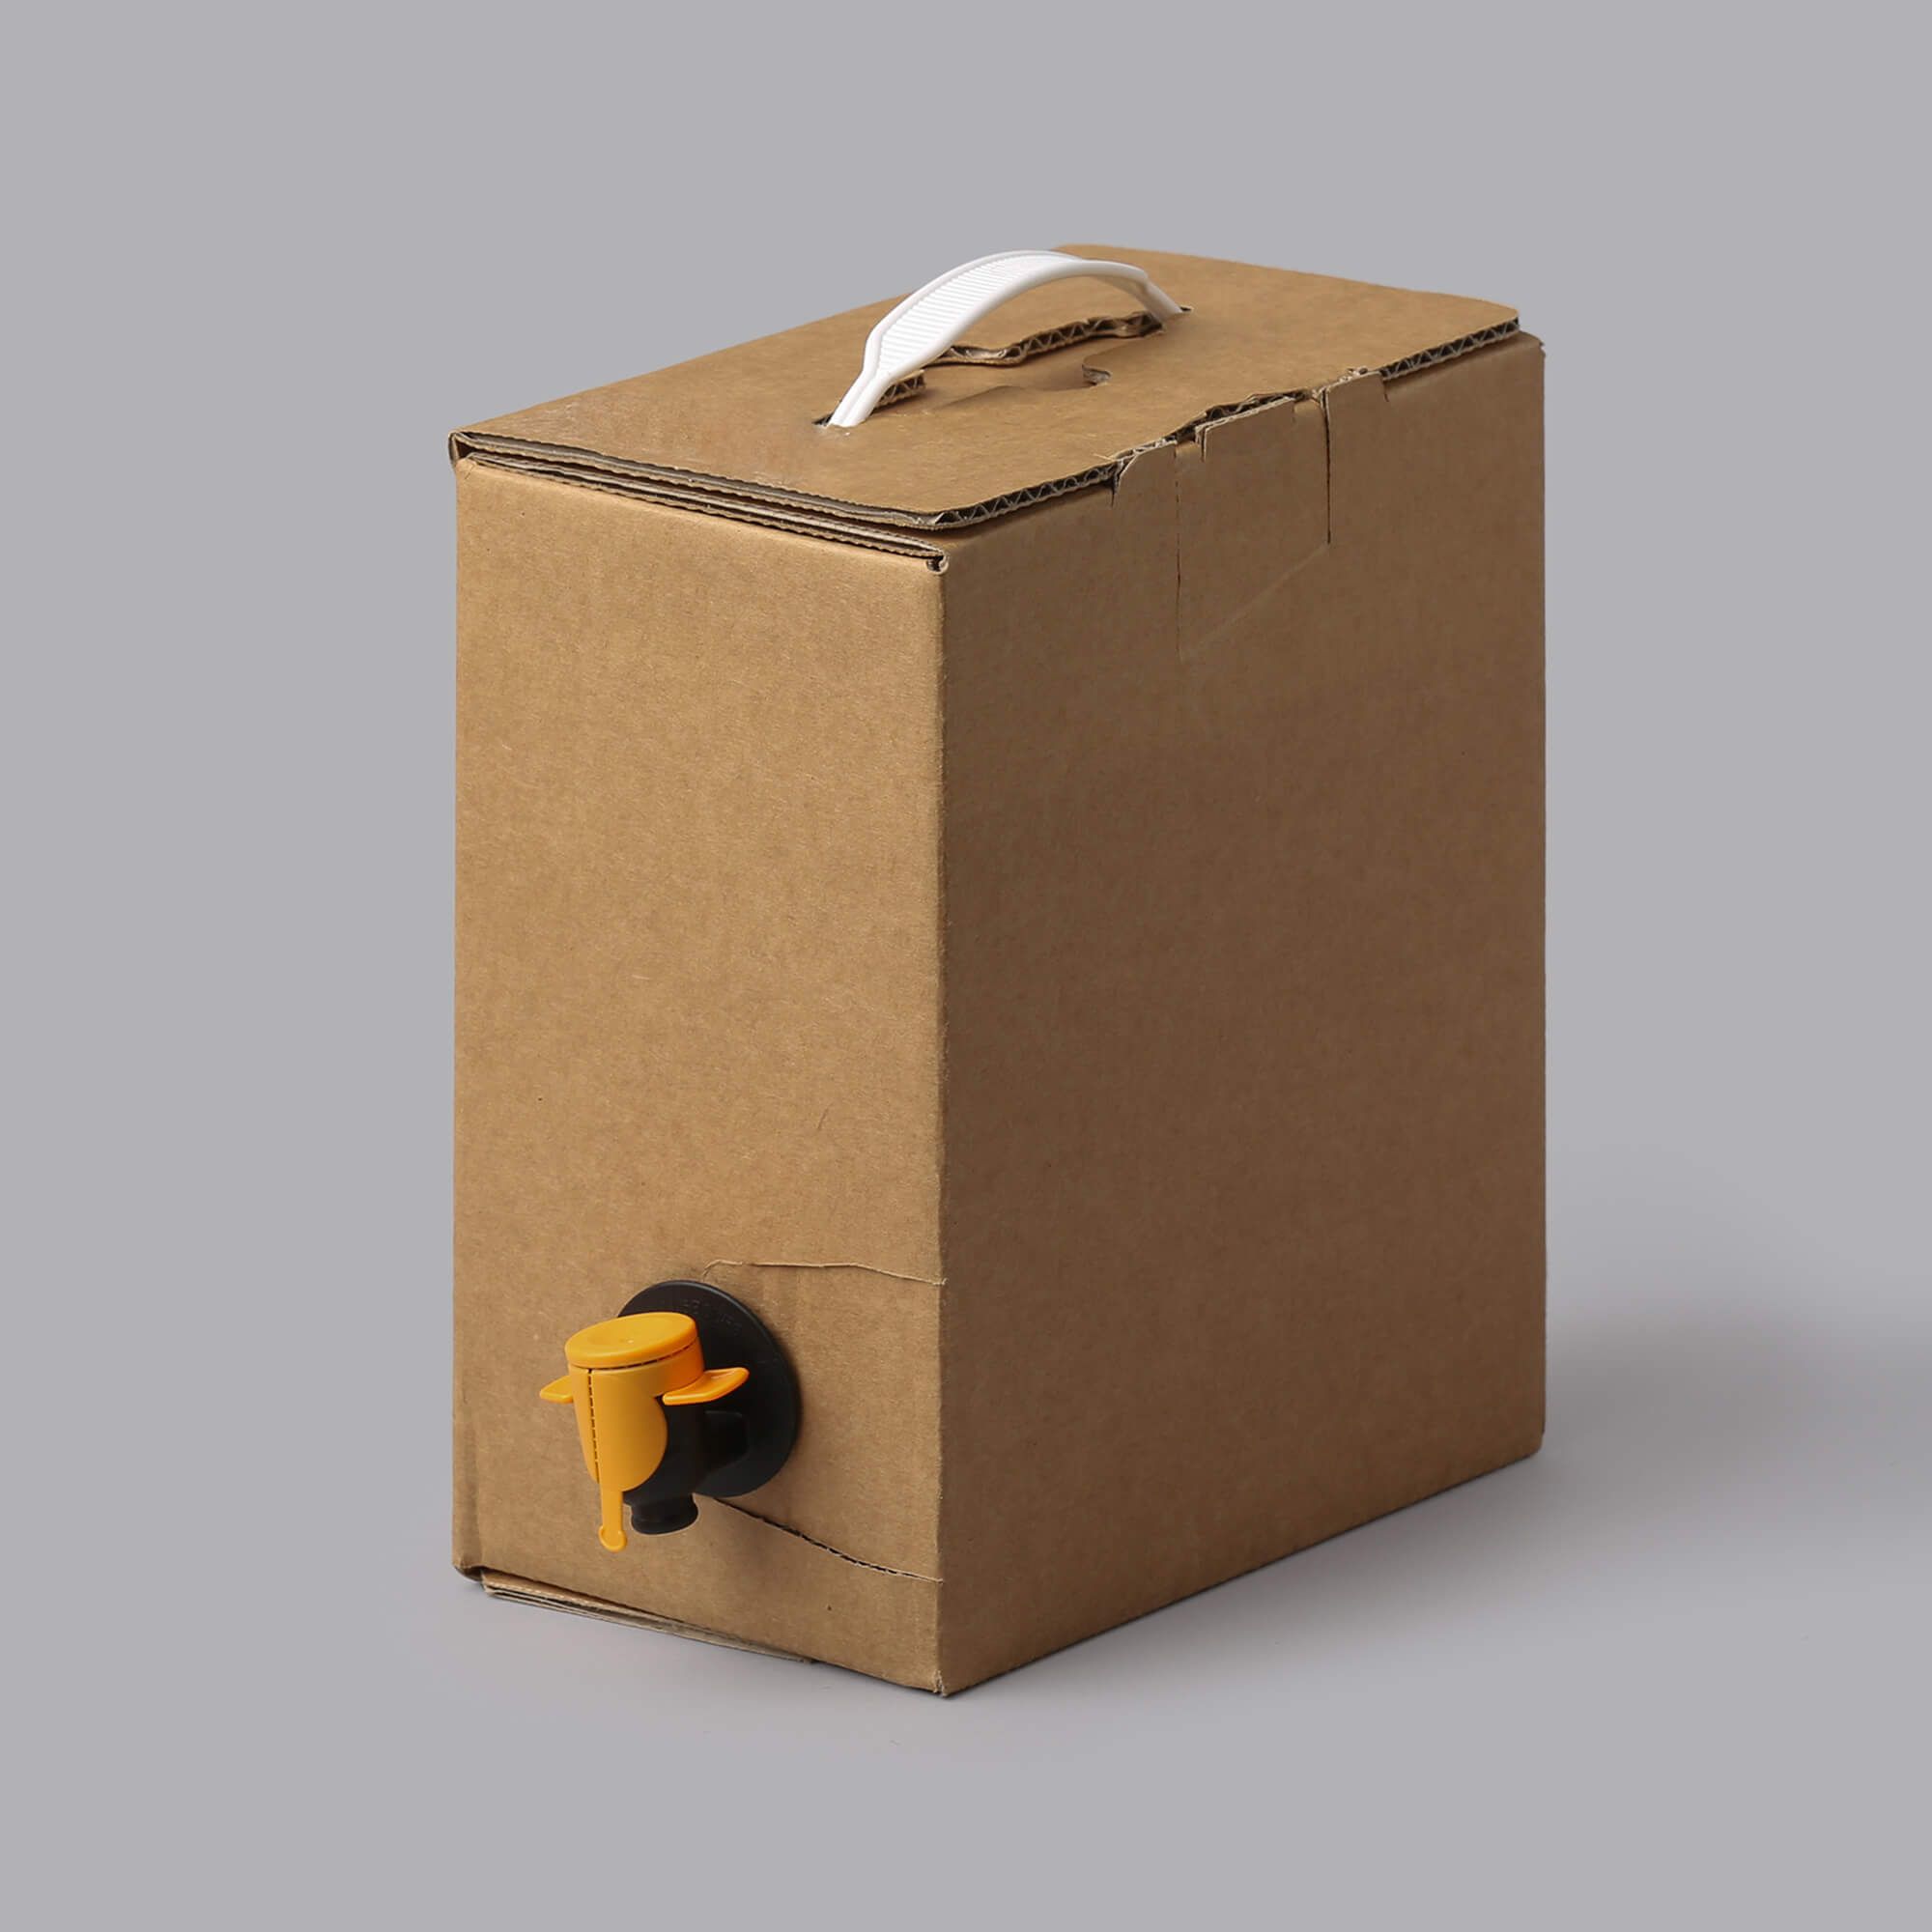 But The Stranger necessity Brown Bag in Box cardboard box for 3l bag 175x106x223mm